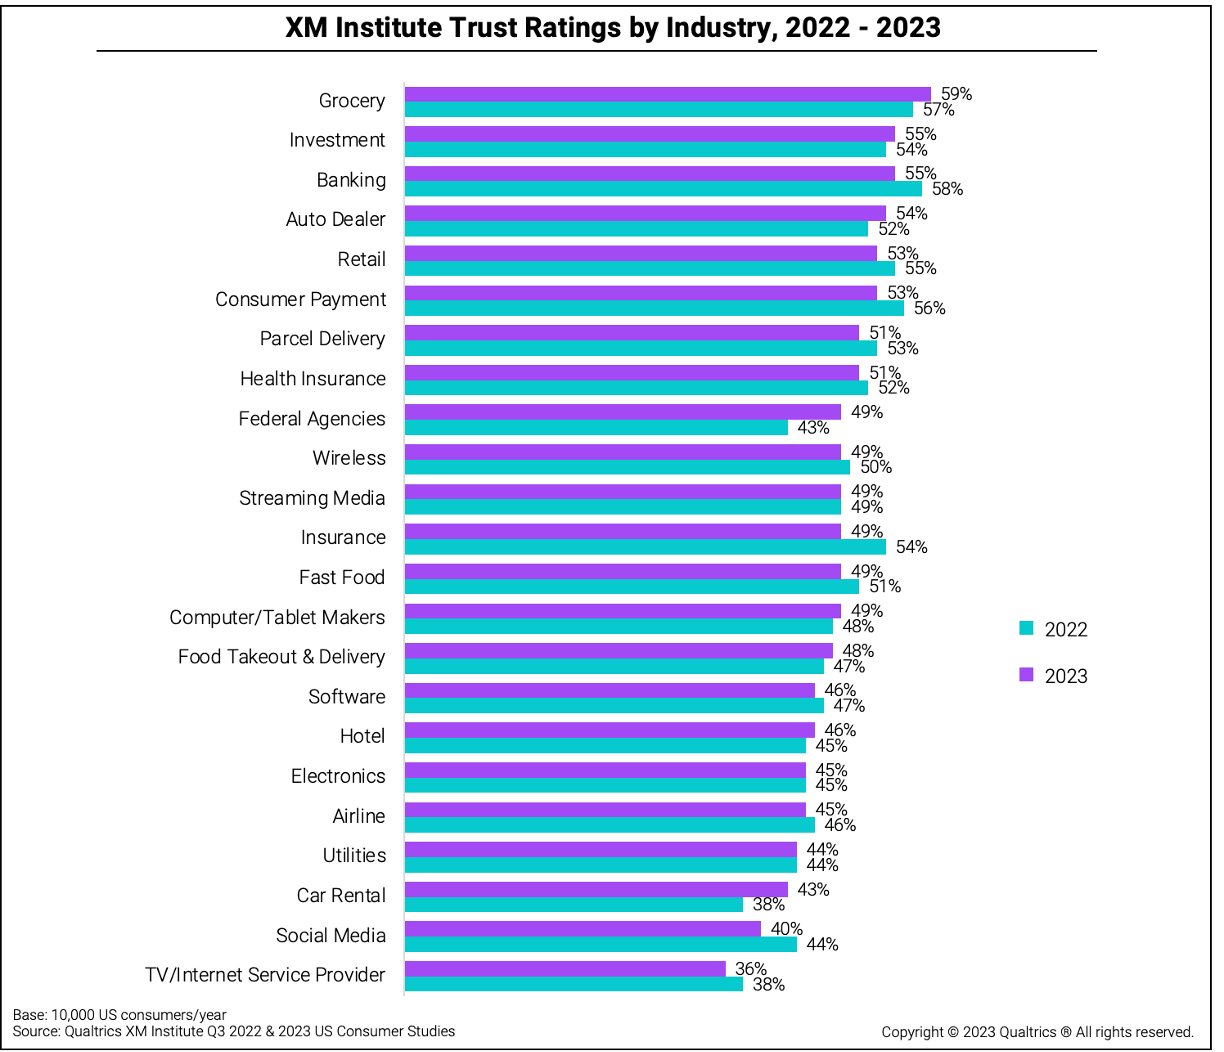 This is a bar graph showing the XM Institute's Trust ratings by industry, comparing 2022 and 2023.